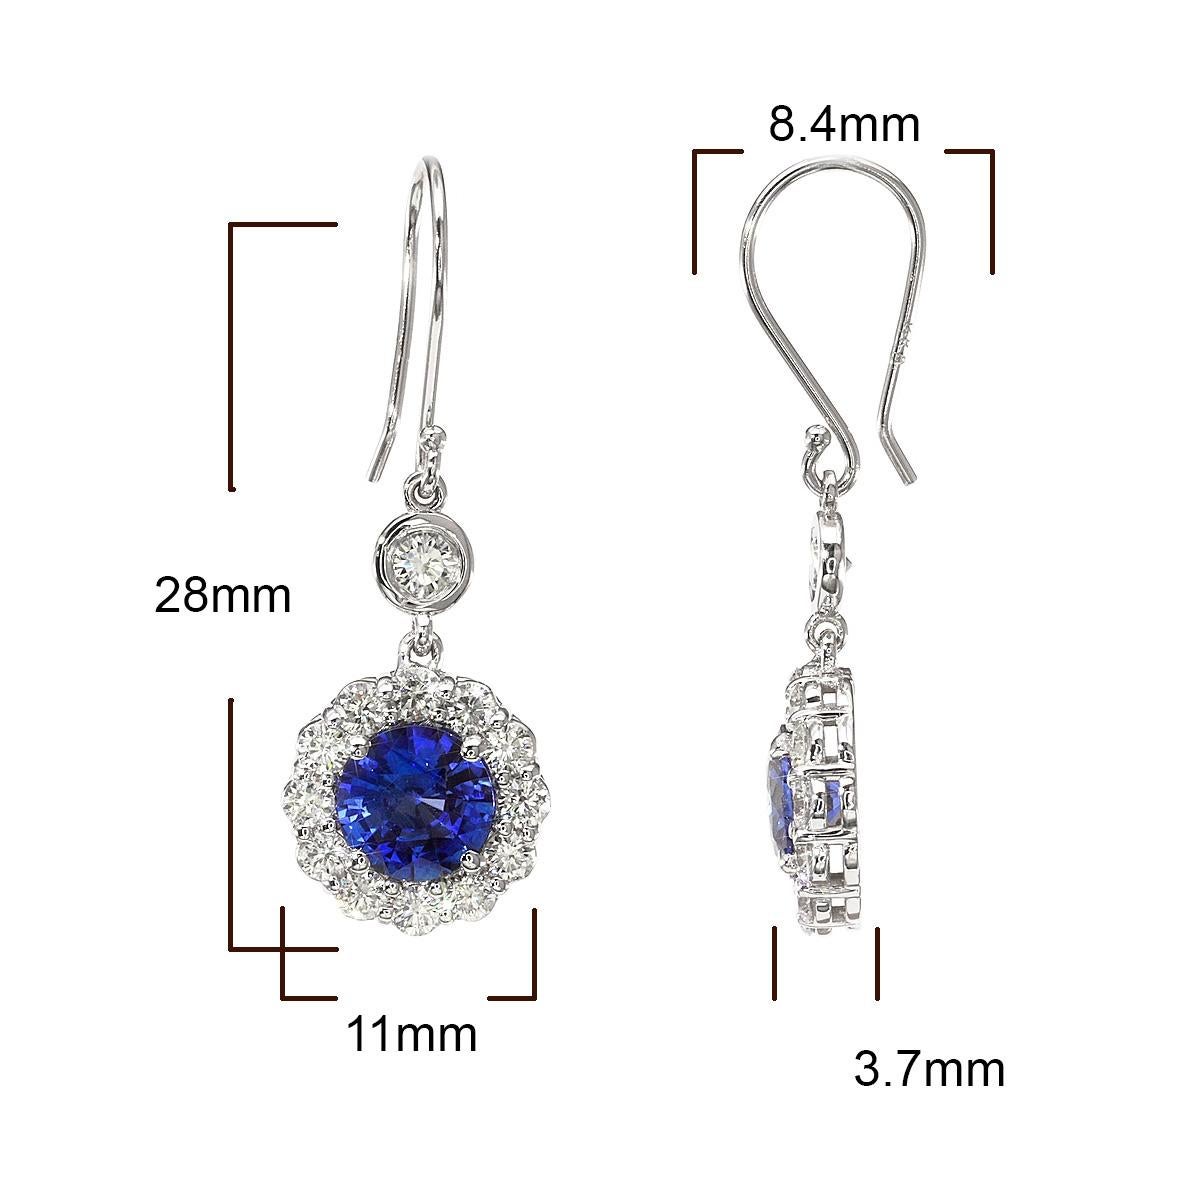 Women's Natural Blue Sapphires 2.24 Carats set in 18K White Gold Earrings with Diamonds For Sale